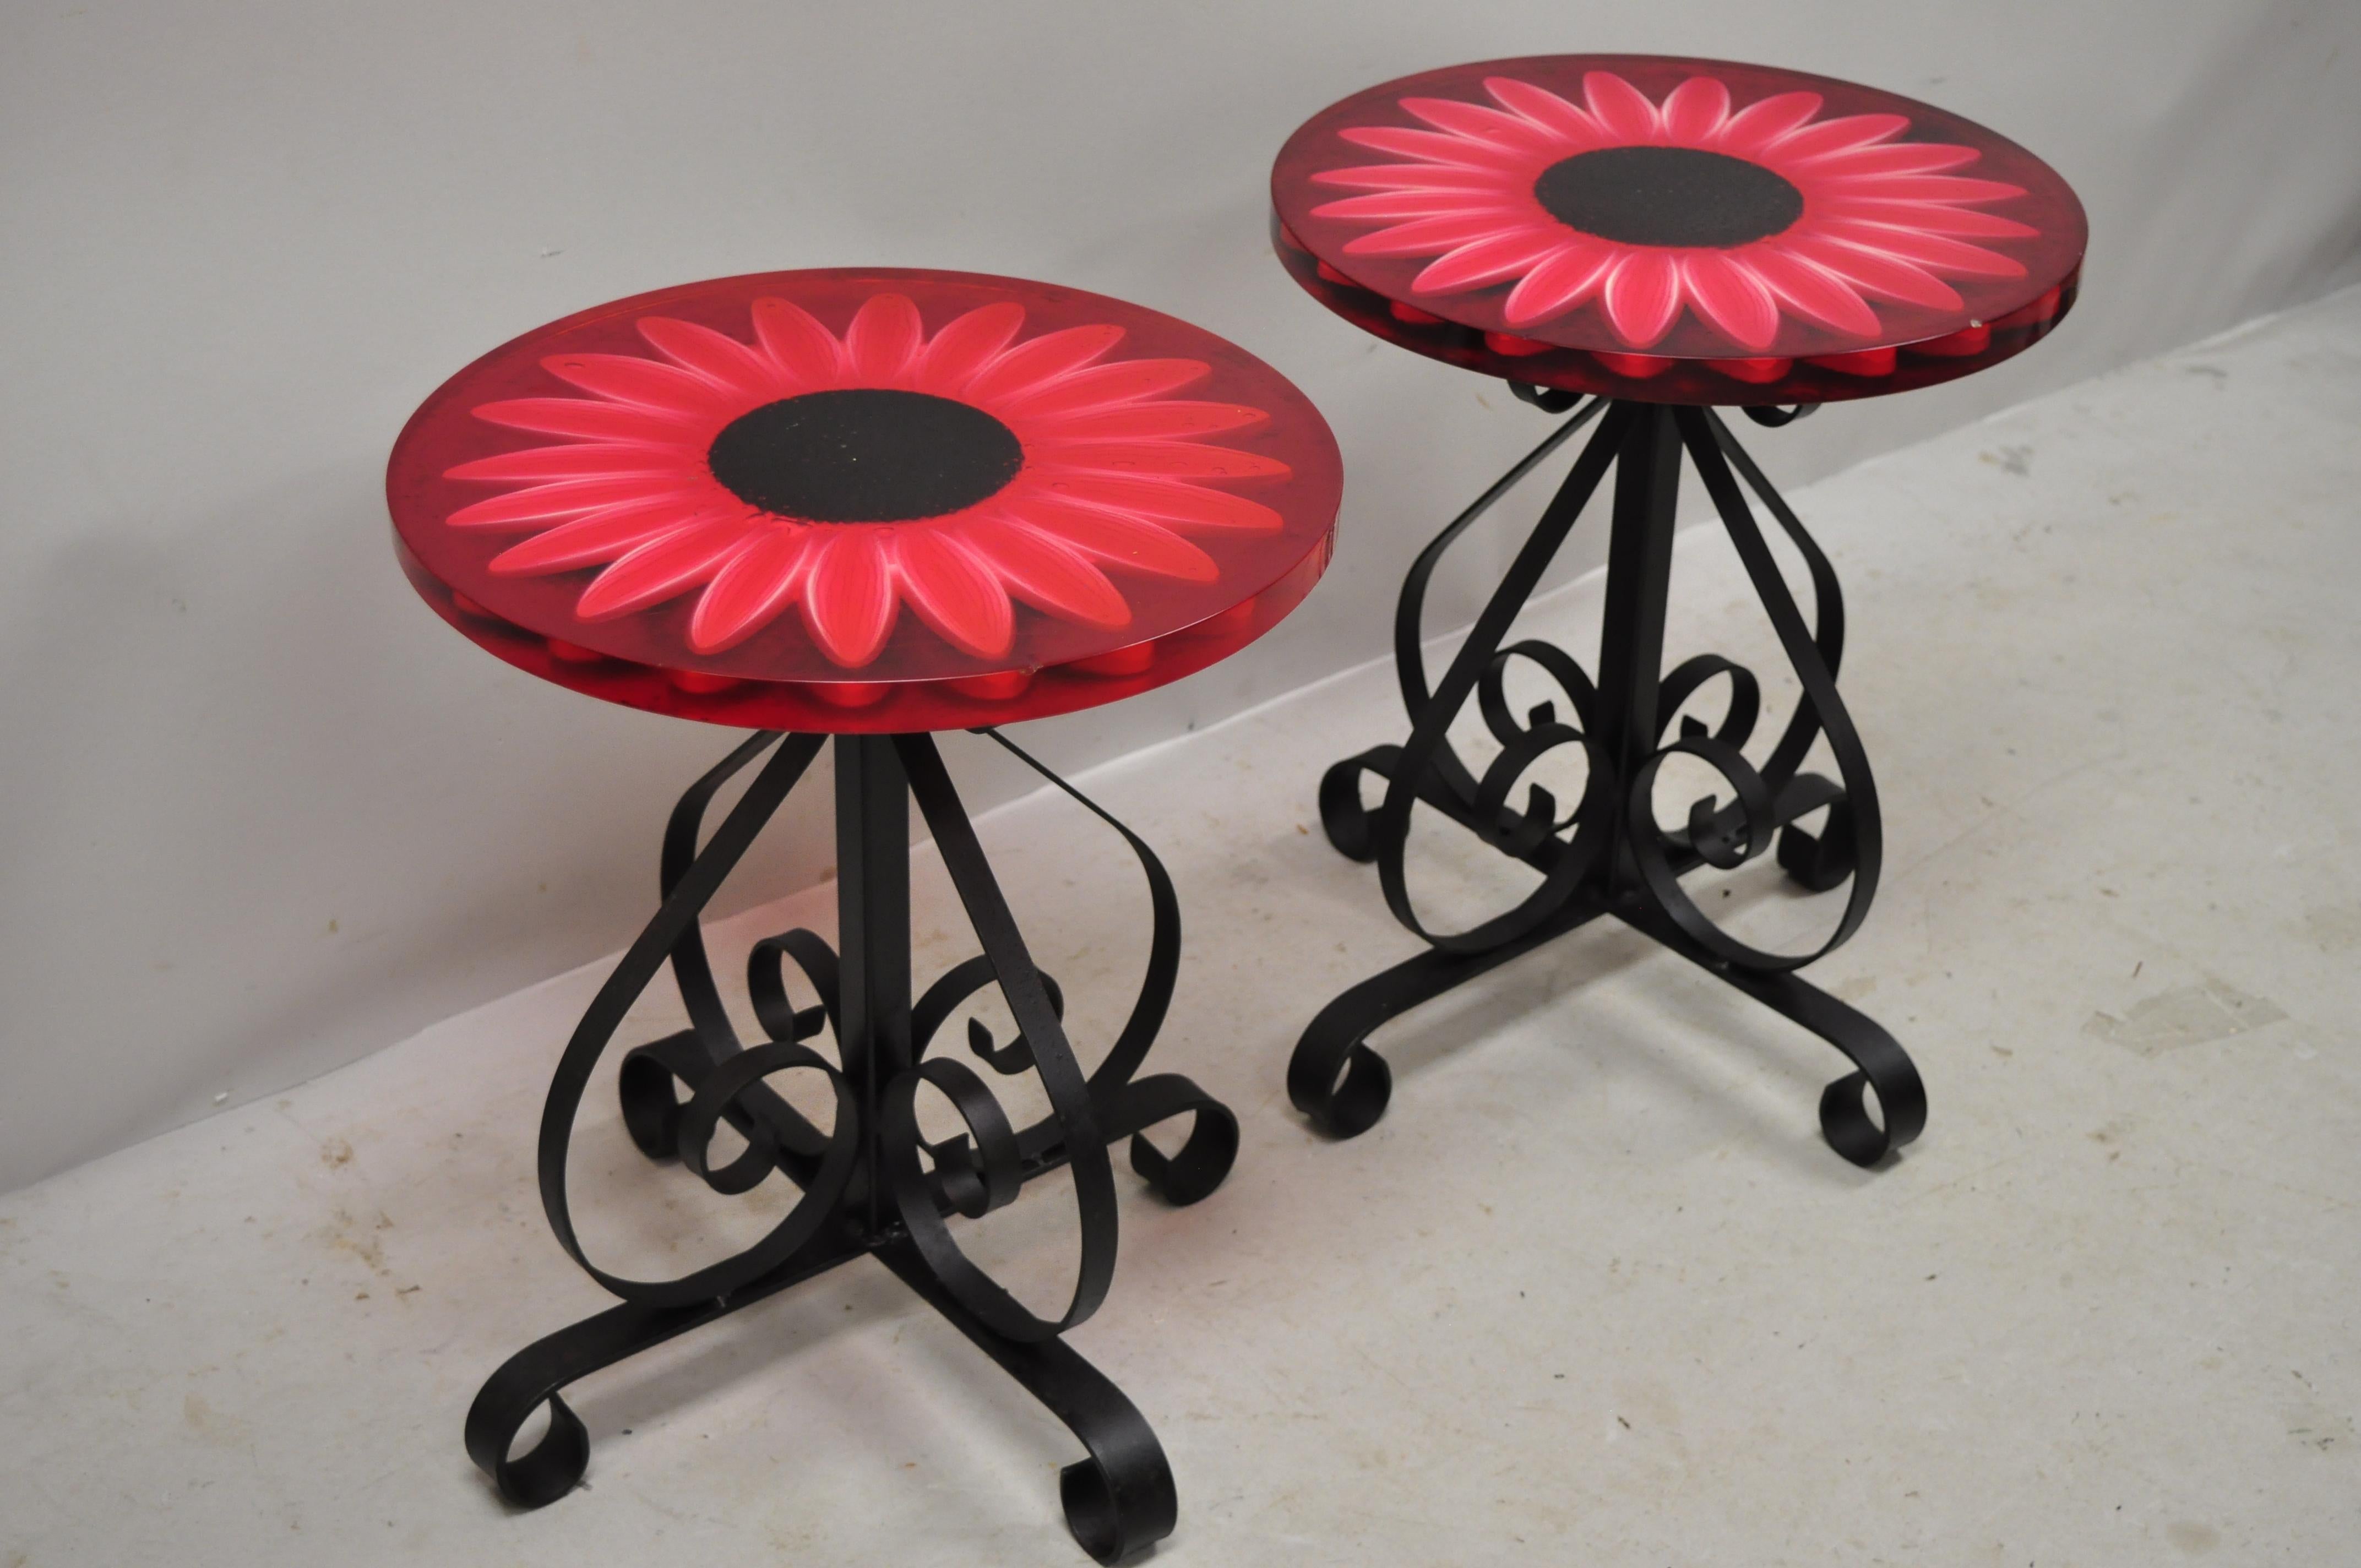 Vintage Wondermold Gamma Associates Red Resin Sun Flower Iron Side Tables, Pair For Sale 5